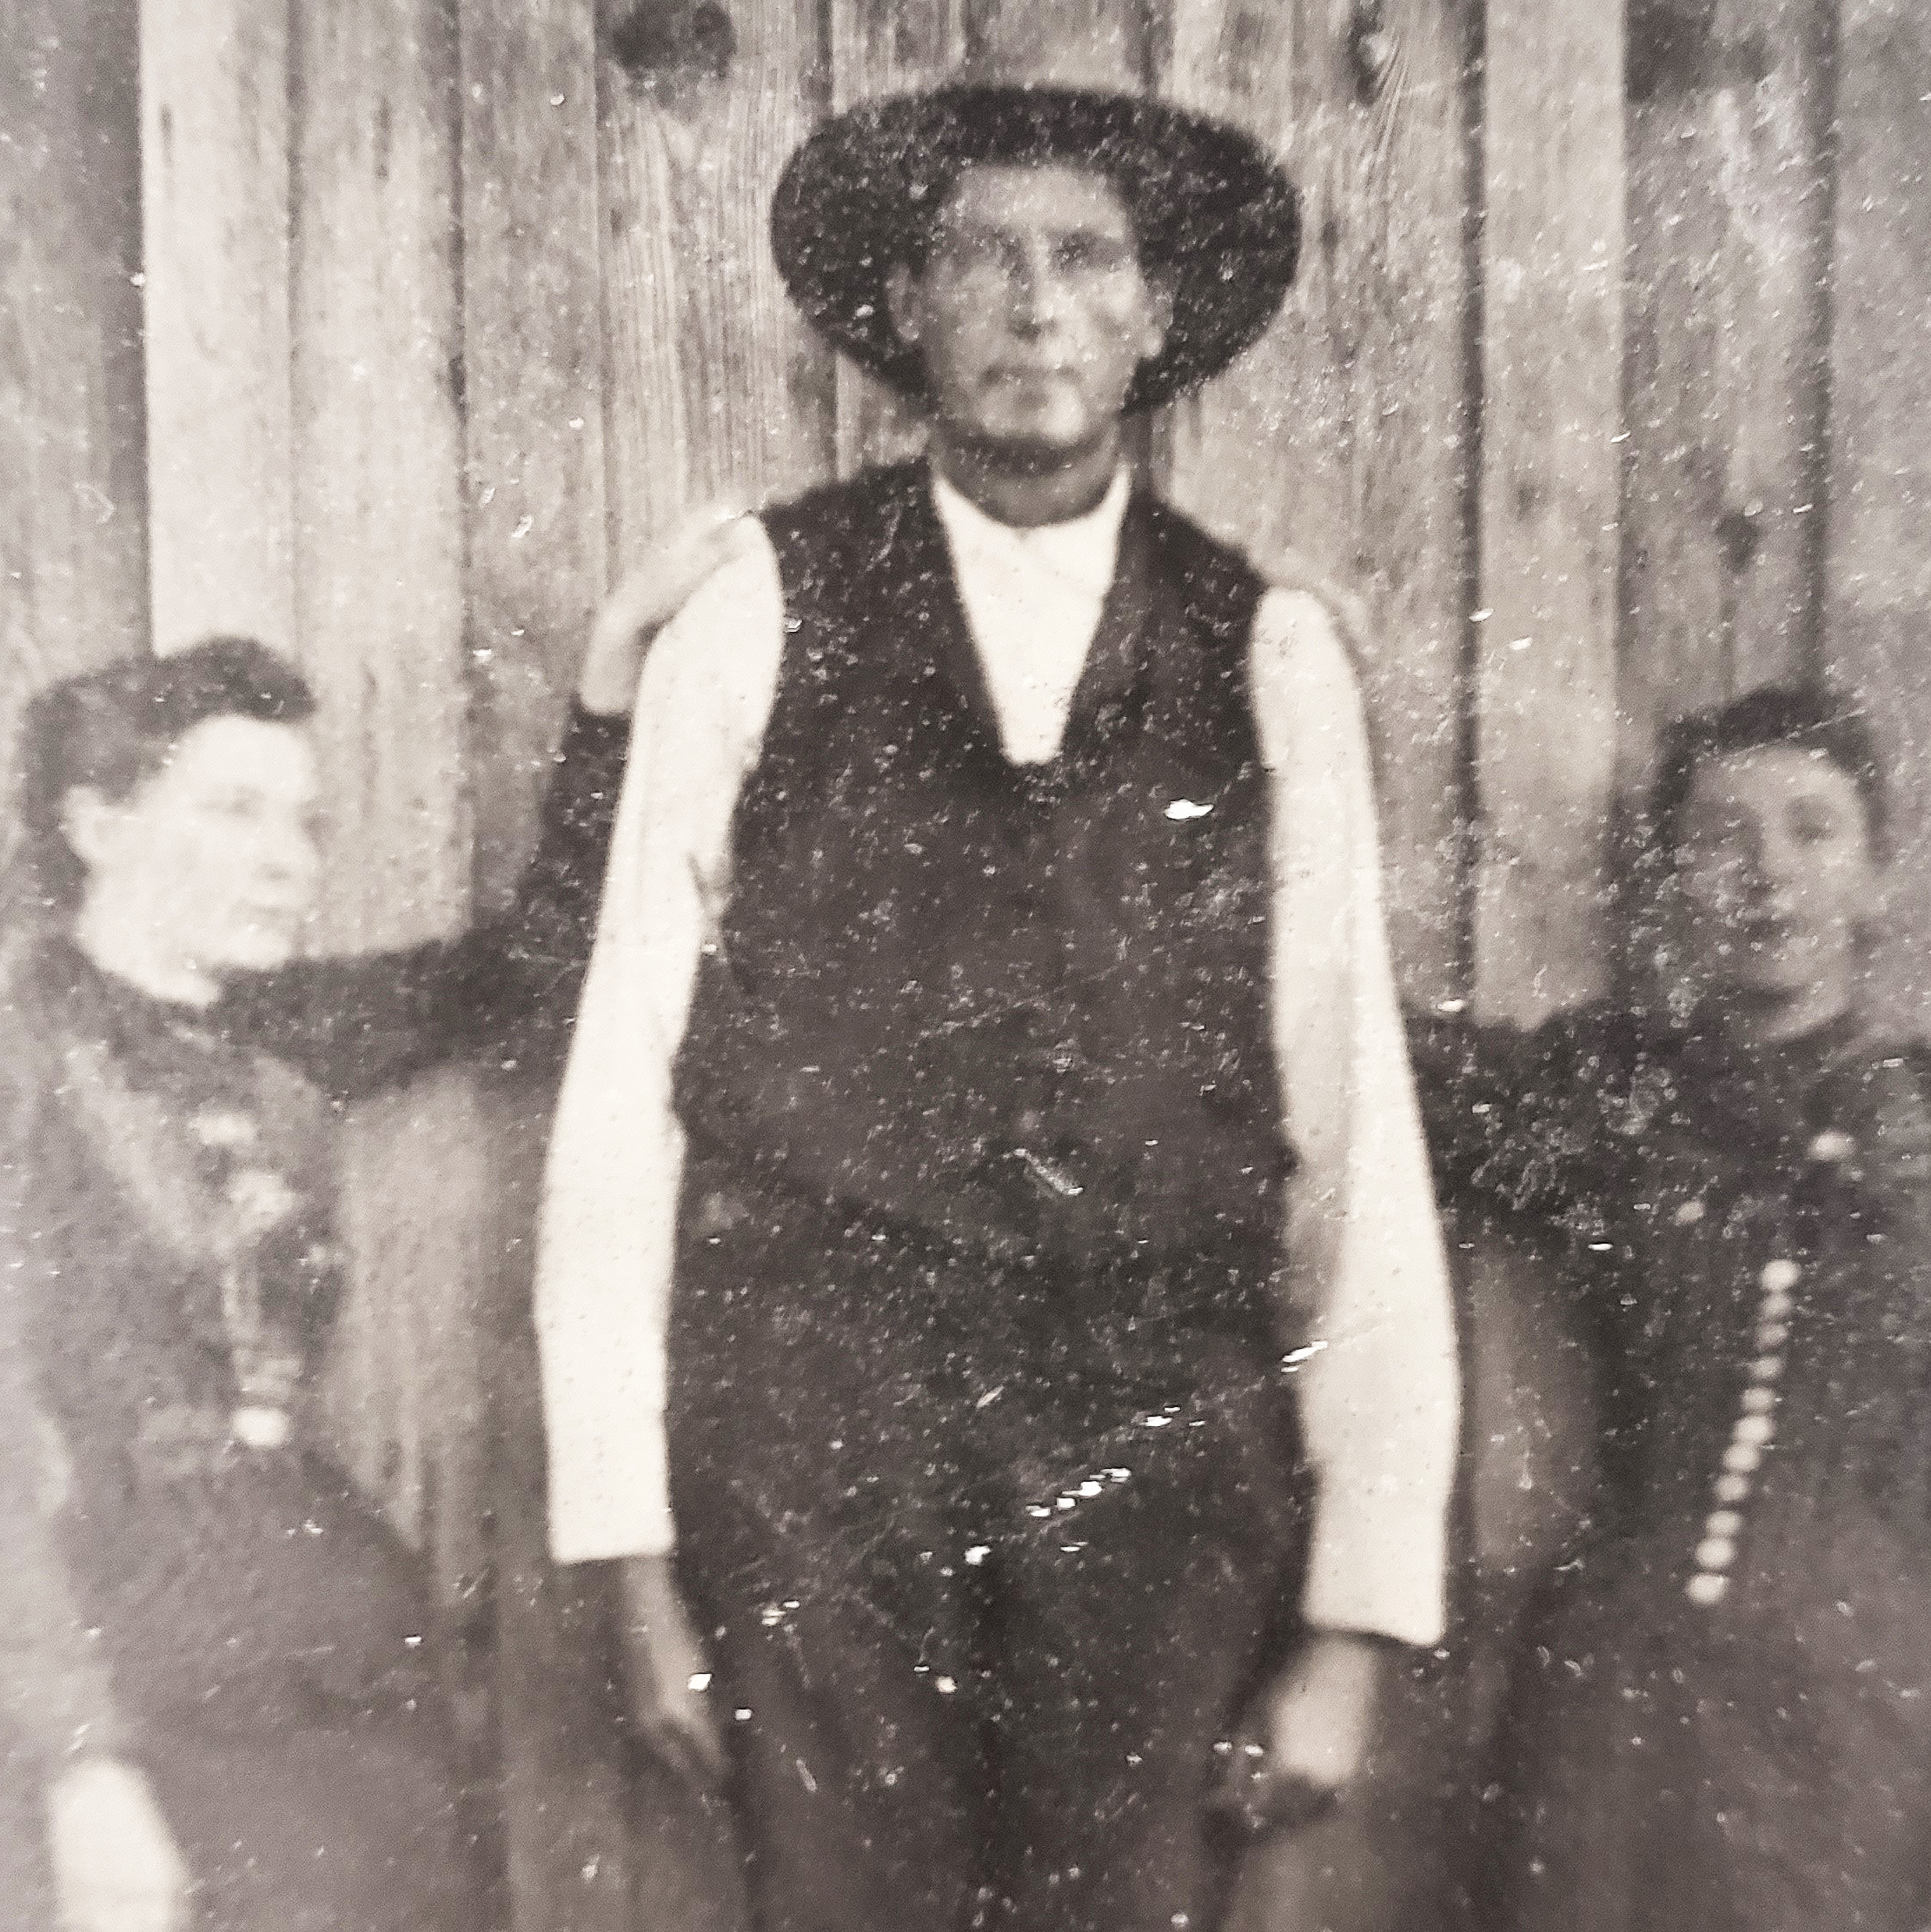 LOCAL HISTORY: Who was sideshow giant Big Jim Patterson?